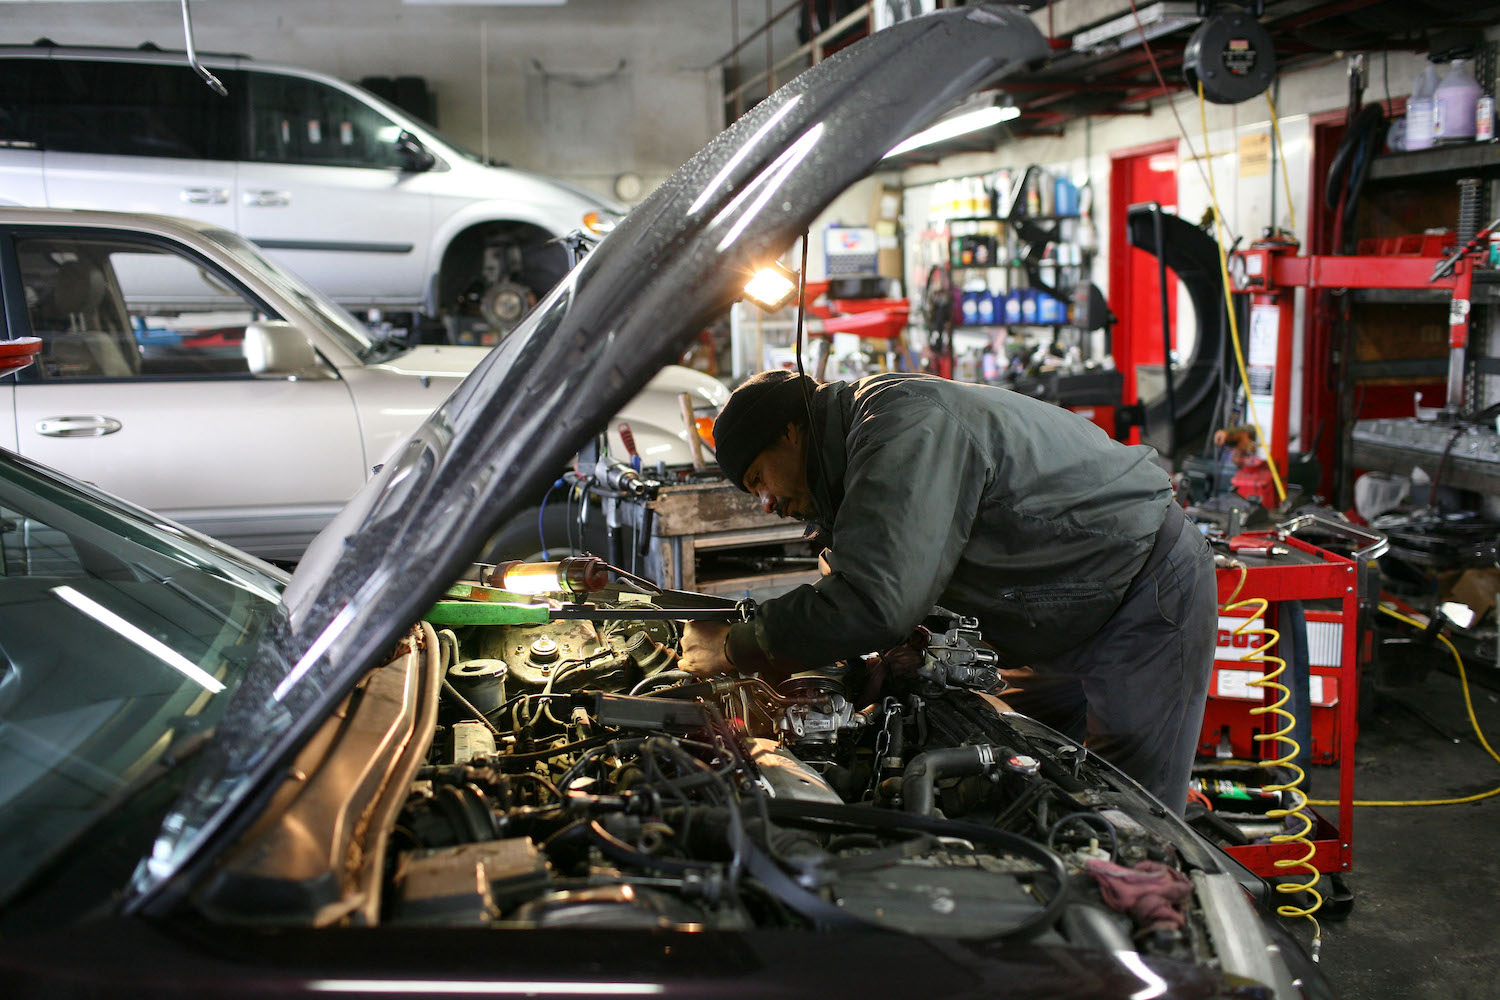 A man repairing a car, likely after the check engine light came on